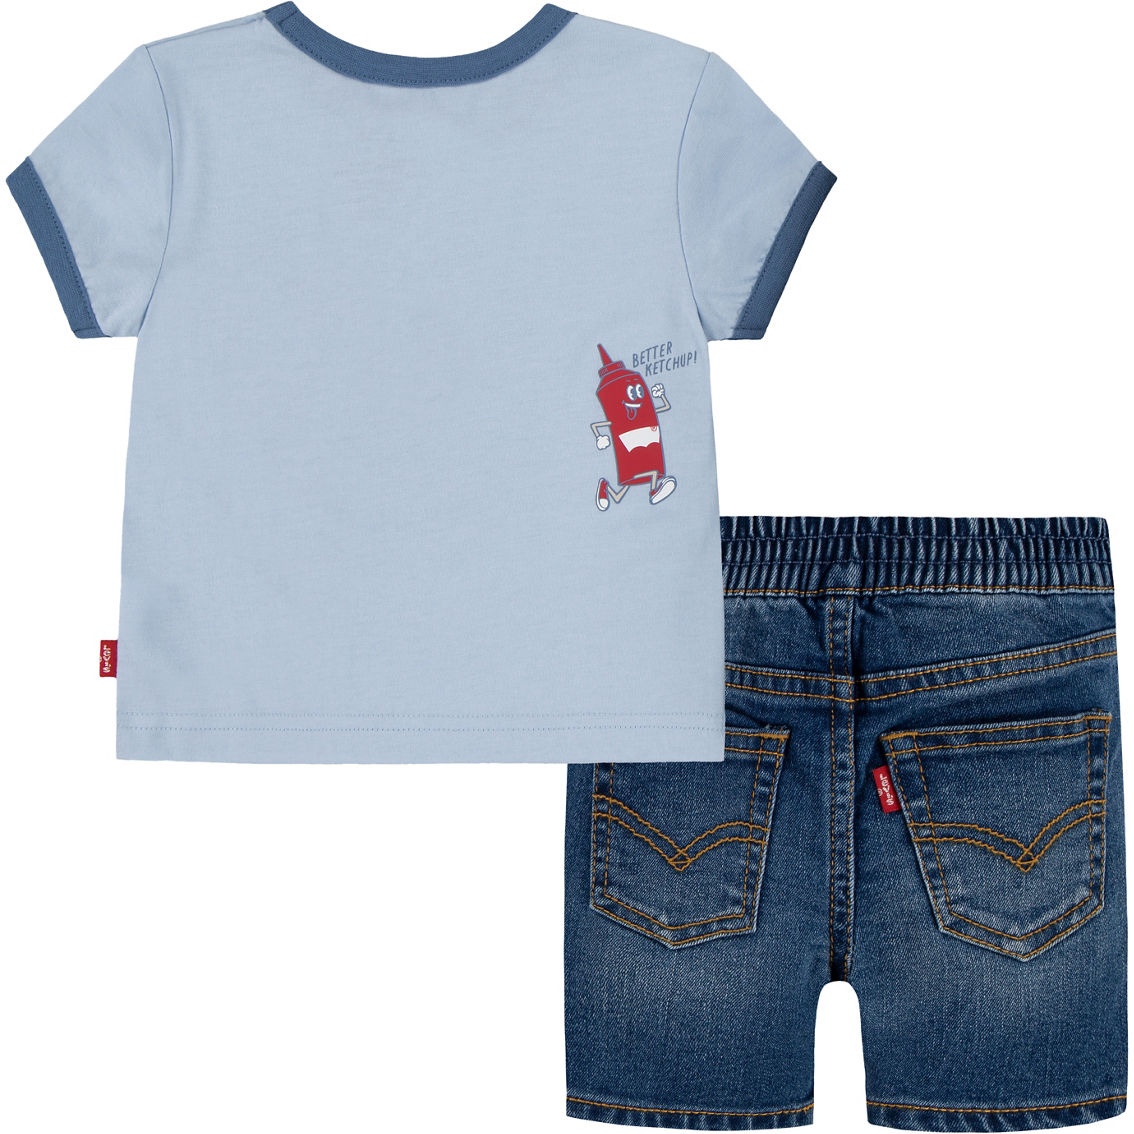 Levi's Baby Boys Cookout Tee and Shorts 2 pc. Set - Image 2 of 7